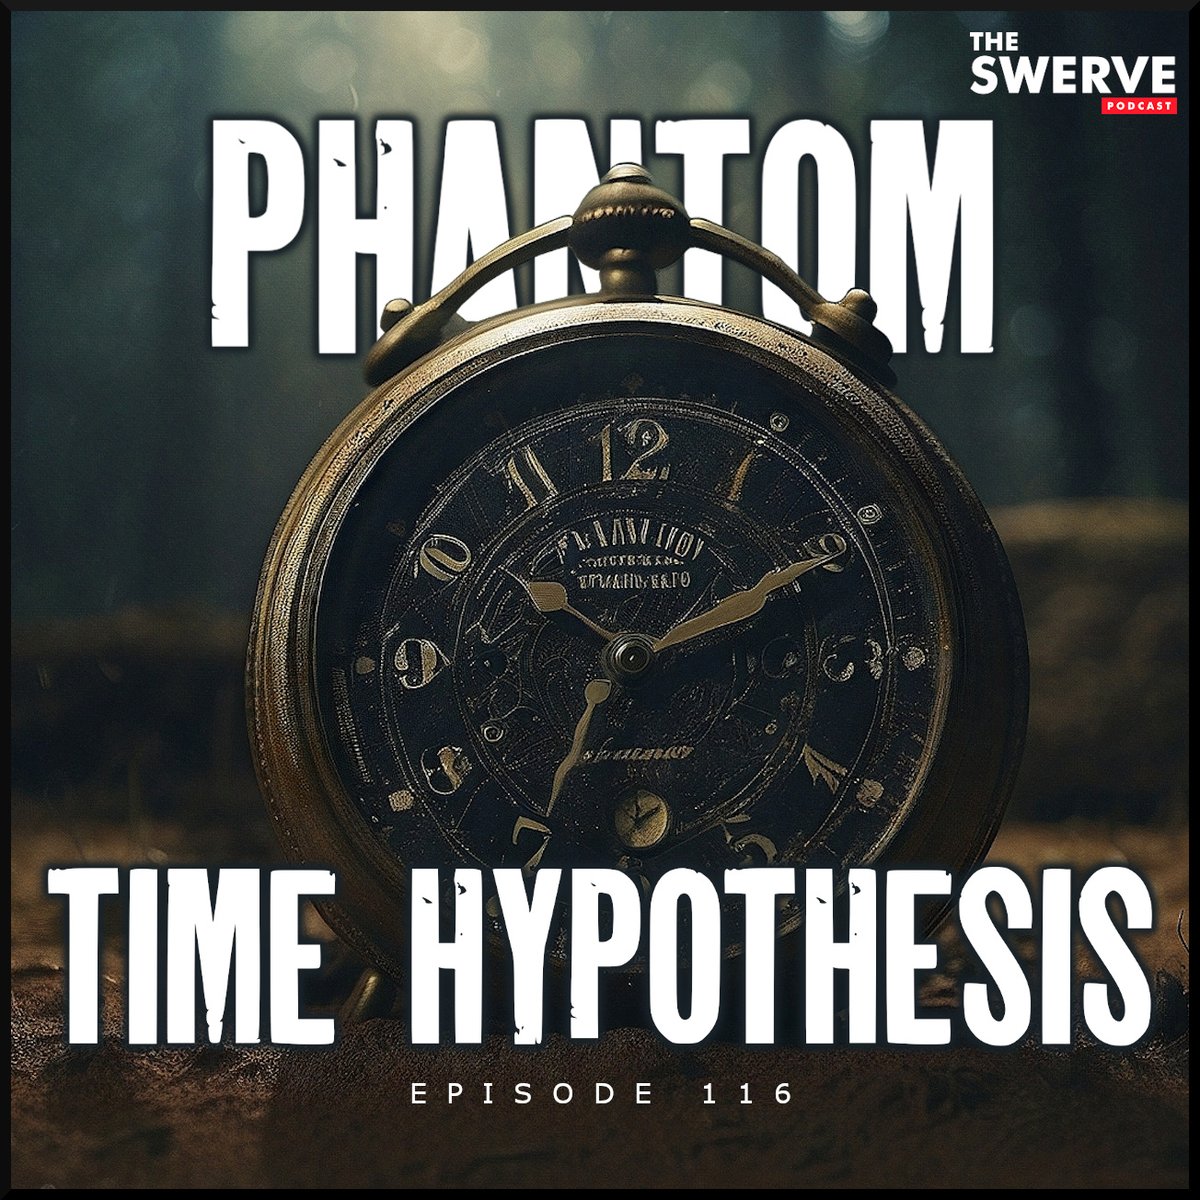 NEW EPISODE! #PhantomTime 

🎧LINKS ARE IN BIO!

⟁ SPOTIFY: tinyurl.com/y6b85kse
.
.
#MiddleAges #Conspiracy #HistoricalDebate #RevisionistHistory #ConspiracyTheory #AlternateHistory #Patreon #youtube #spotify #applepodcasts #Podcast  #TheMoreYouKnow #TheSwervePodcast